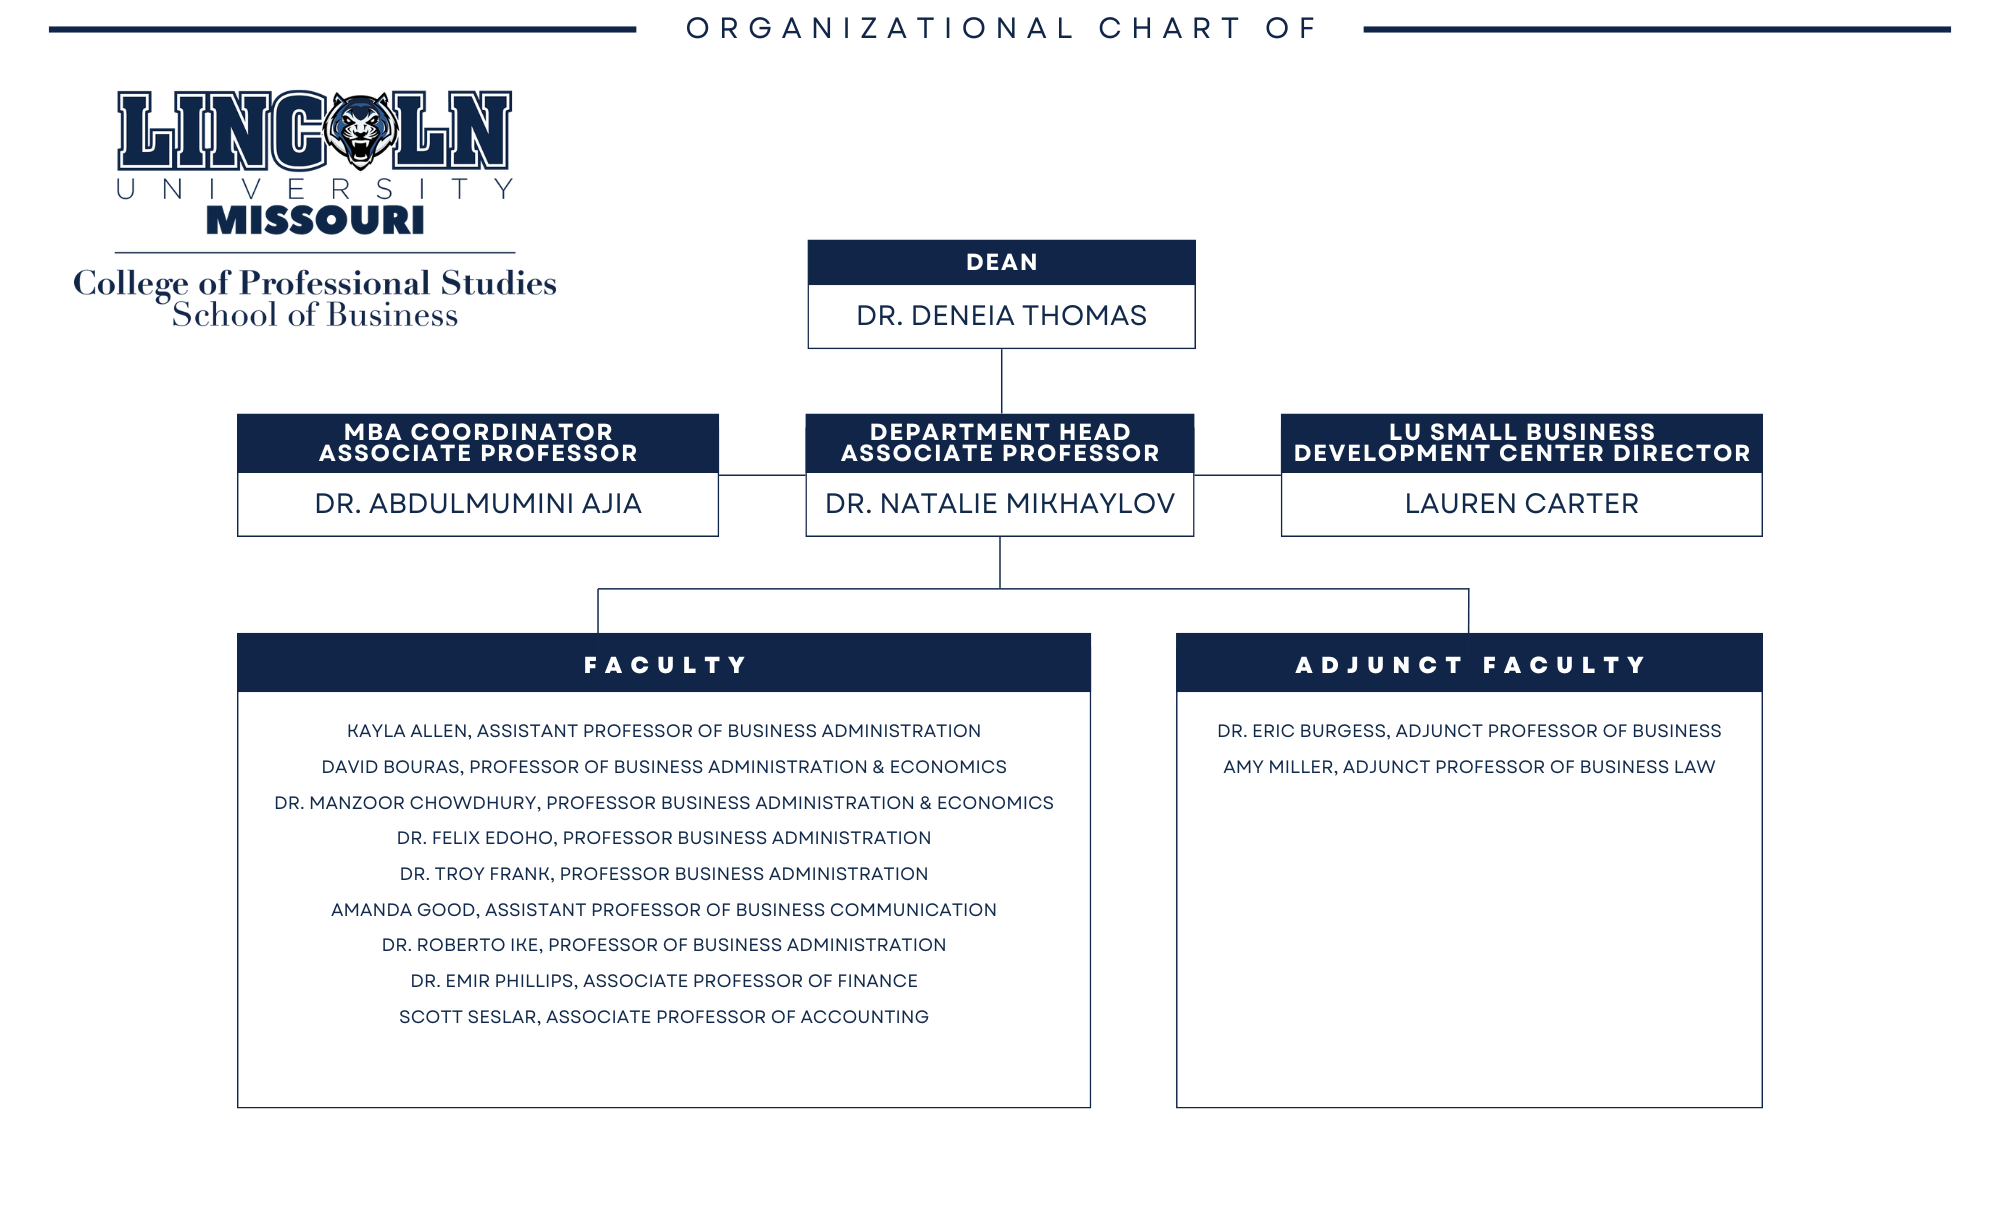 Organizational chart for Lincoln University Missouri School of Business showing the dean, department head, small business director, faculty, and adjunct faculty.